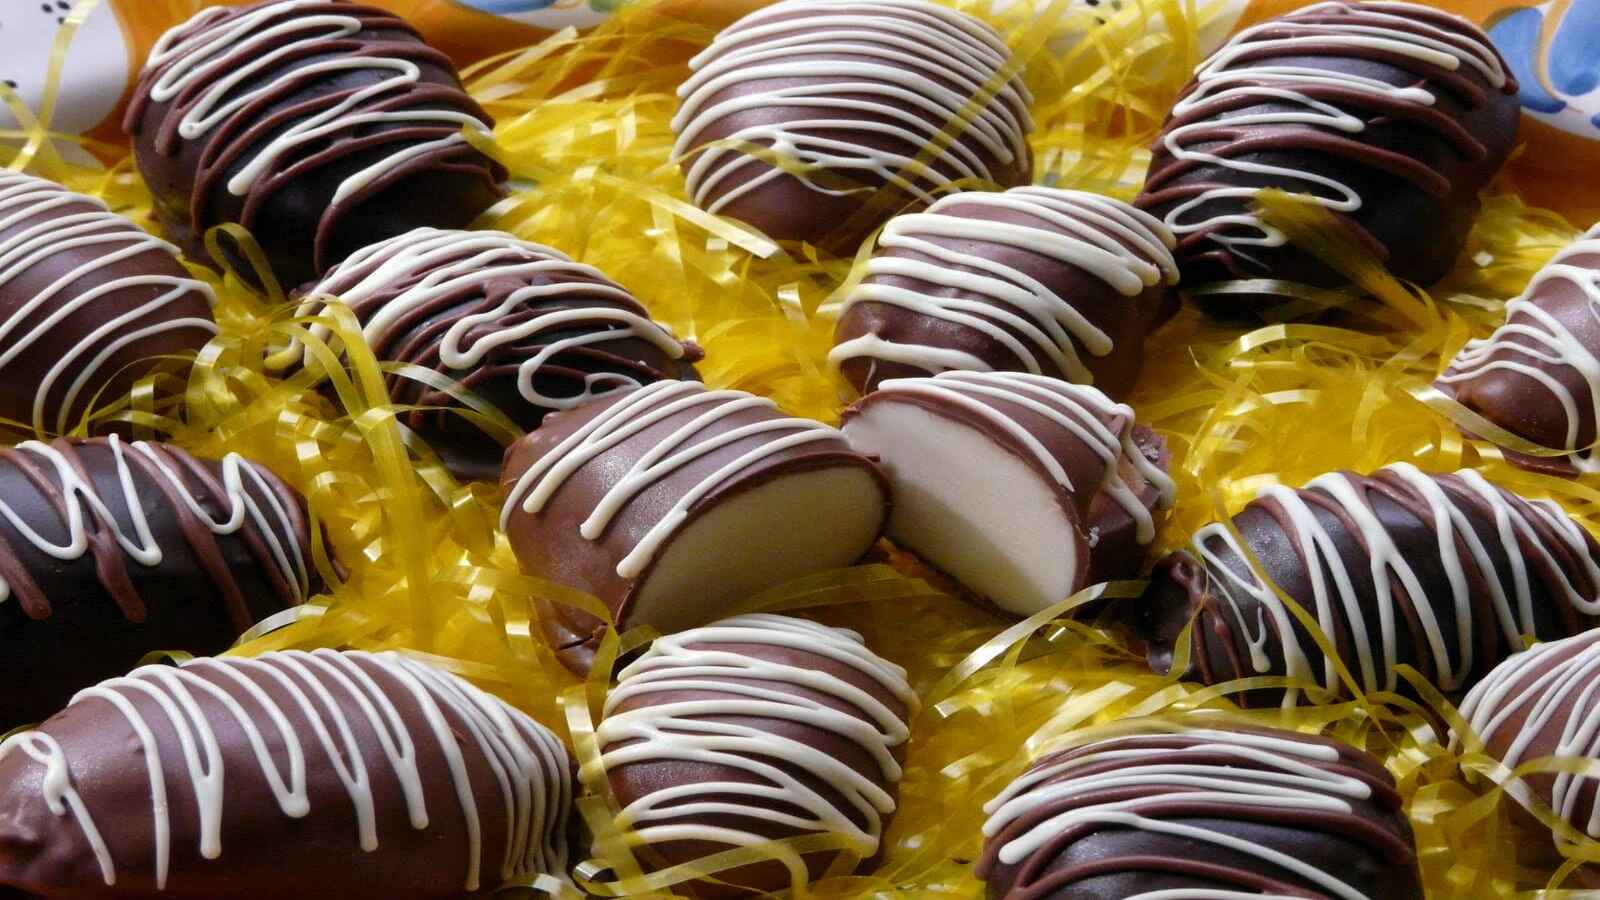 National Cream-Filled Chocolates Day 2023: Date, History, Recipes, Celebration